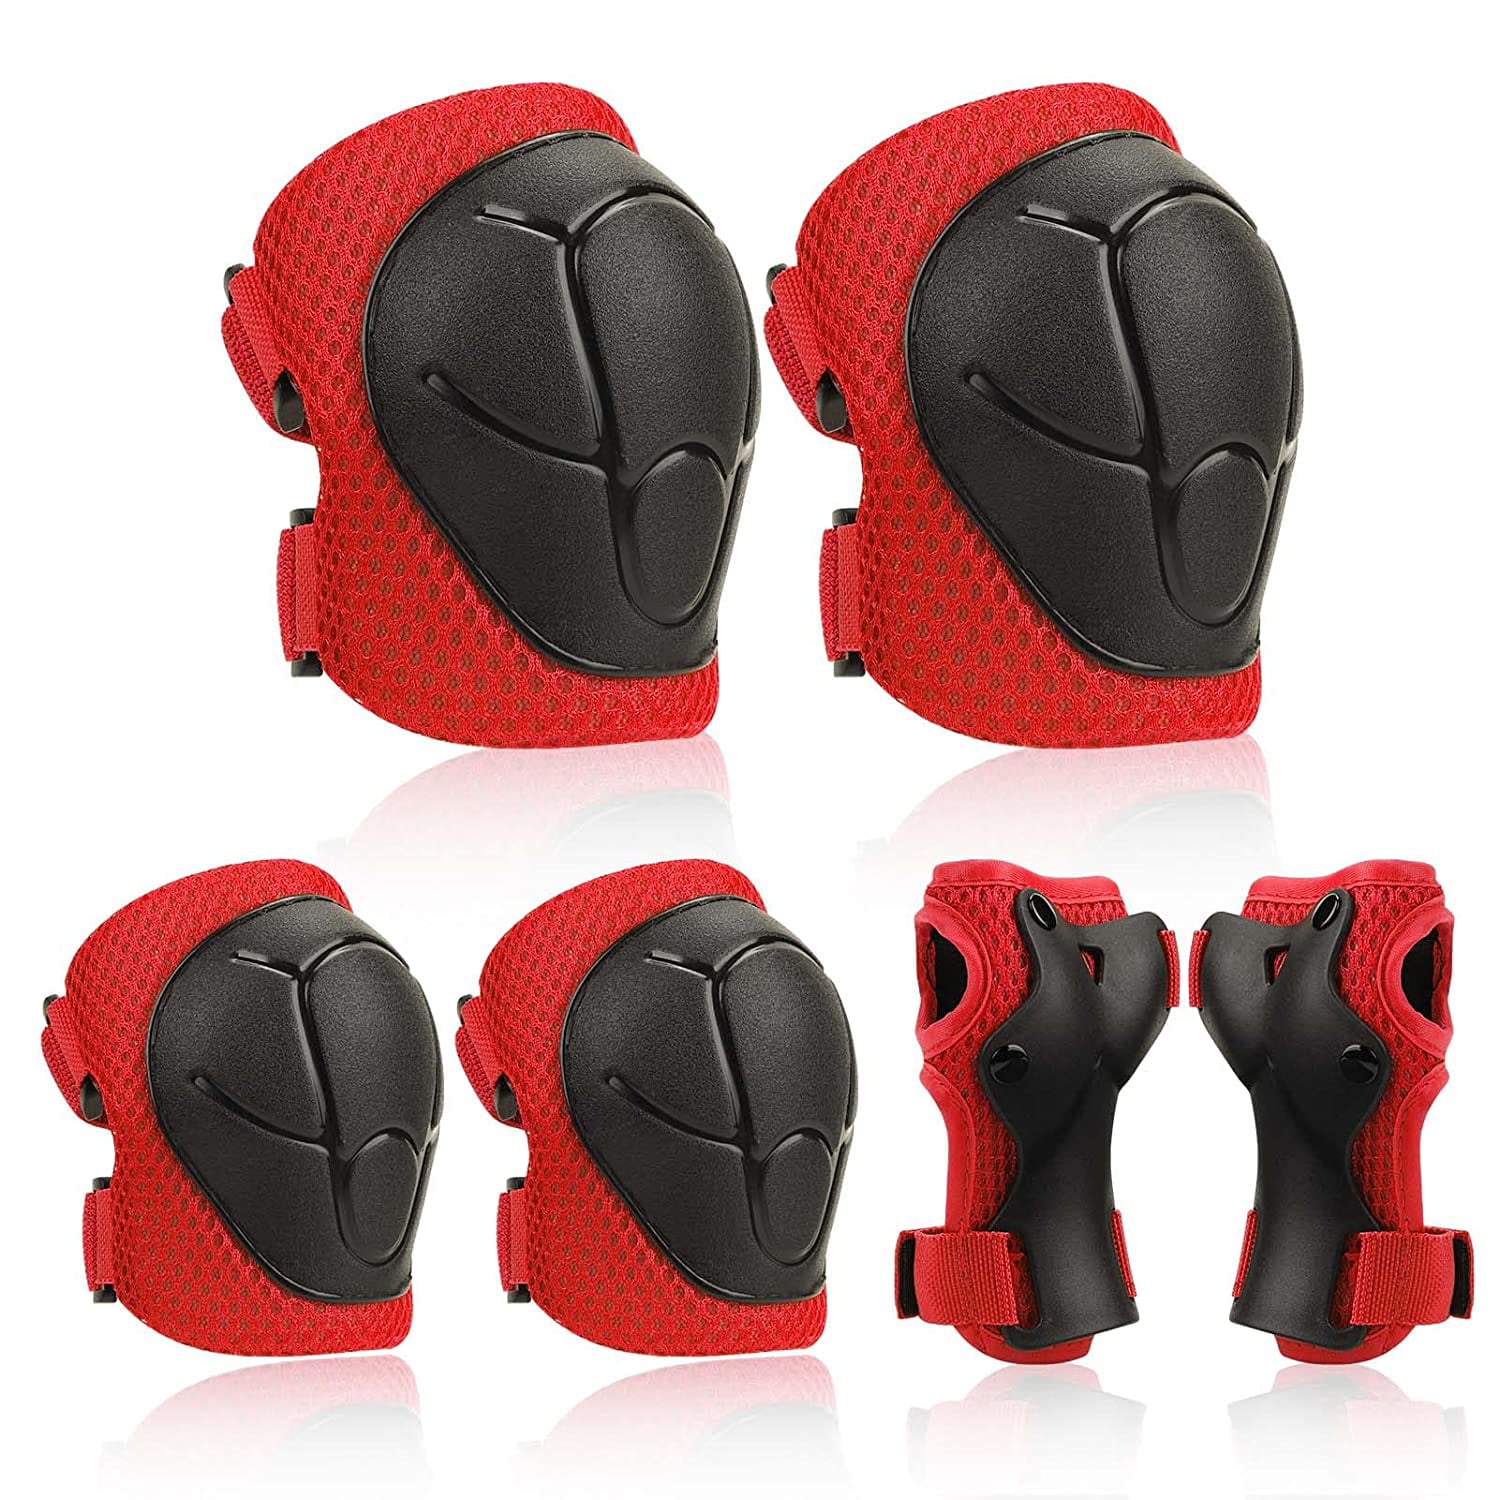 Childrens Protective Gear Knee & Elbow Pads  6-in-1 Set Wrist Guard Small 